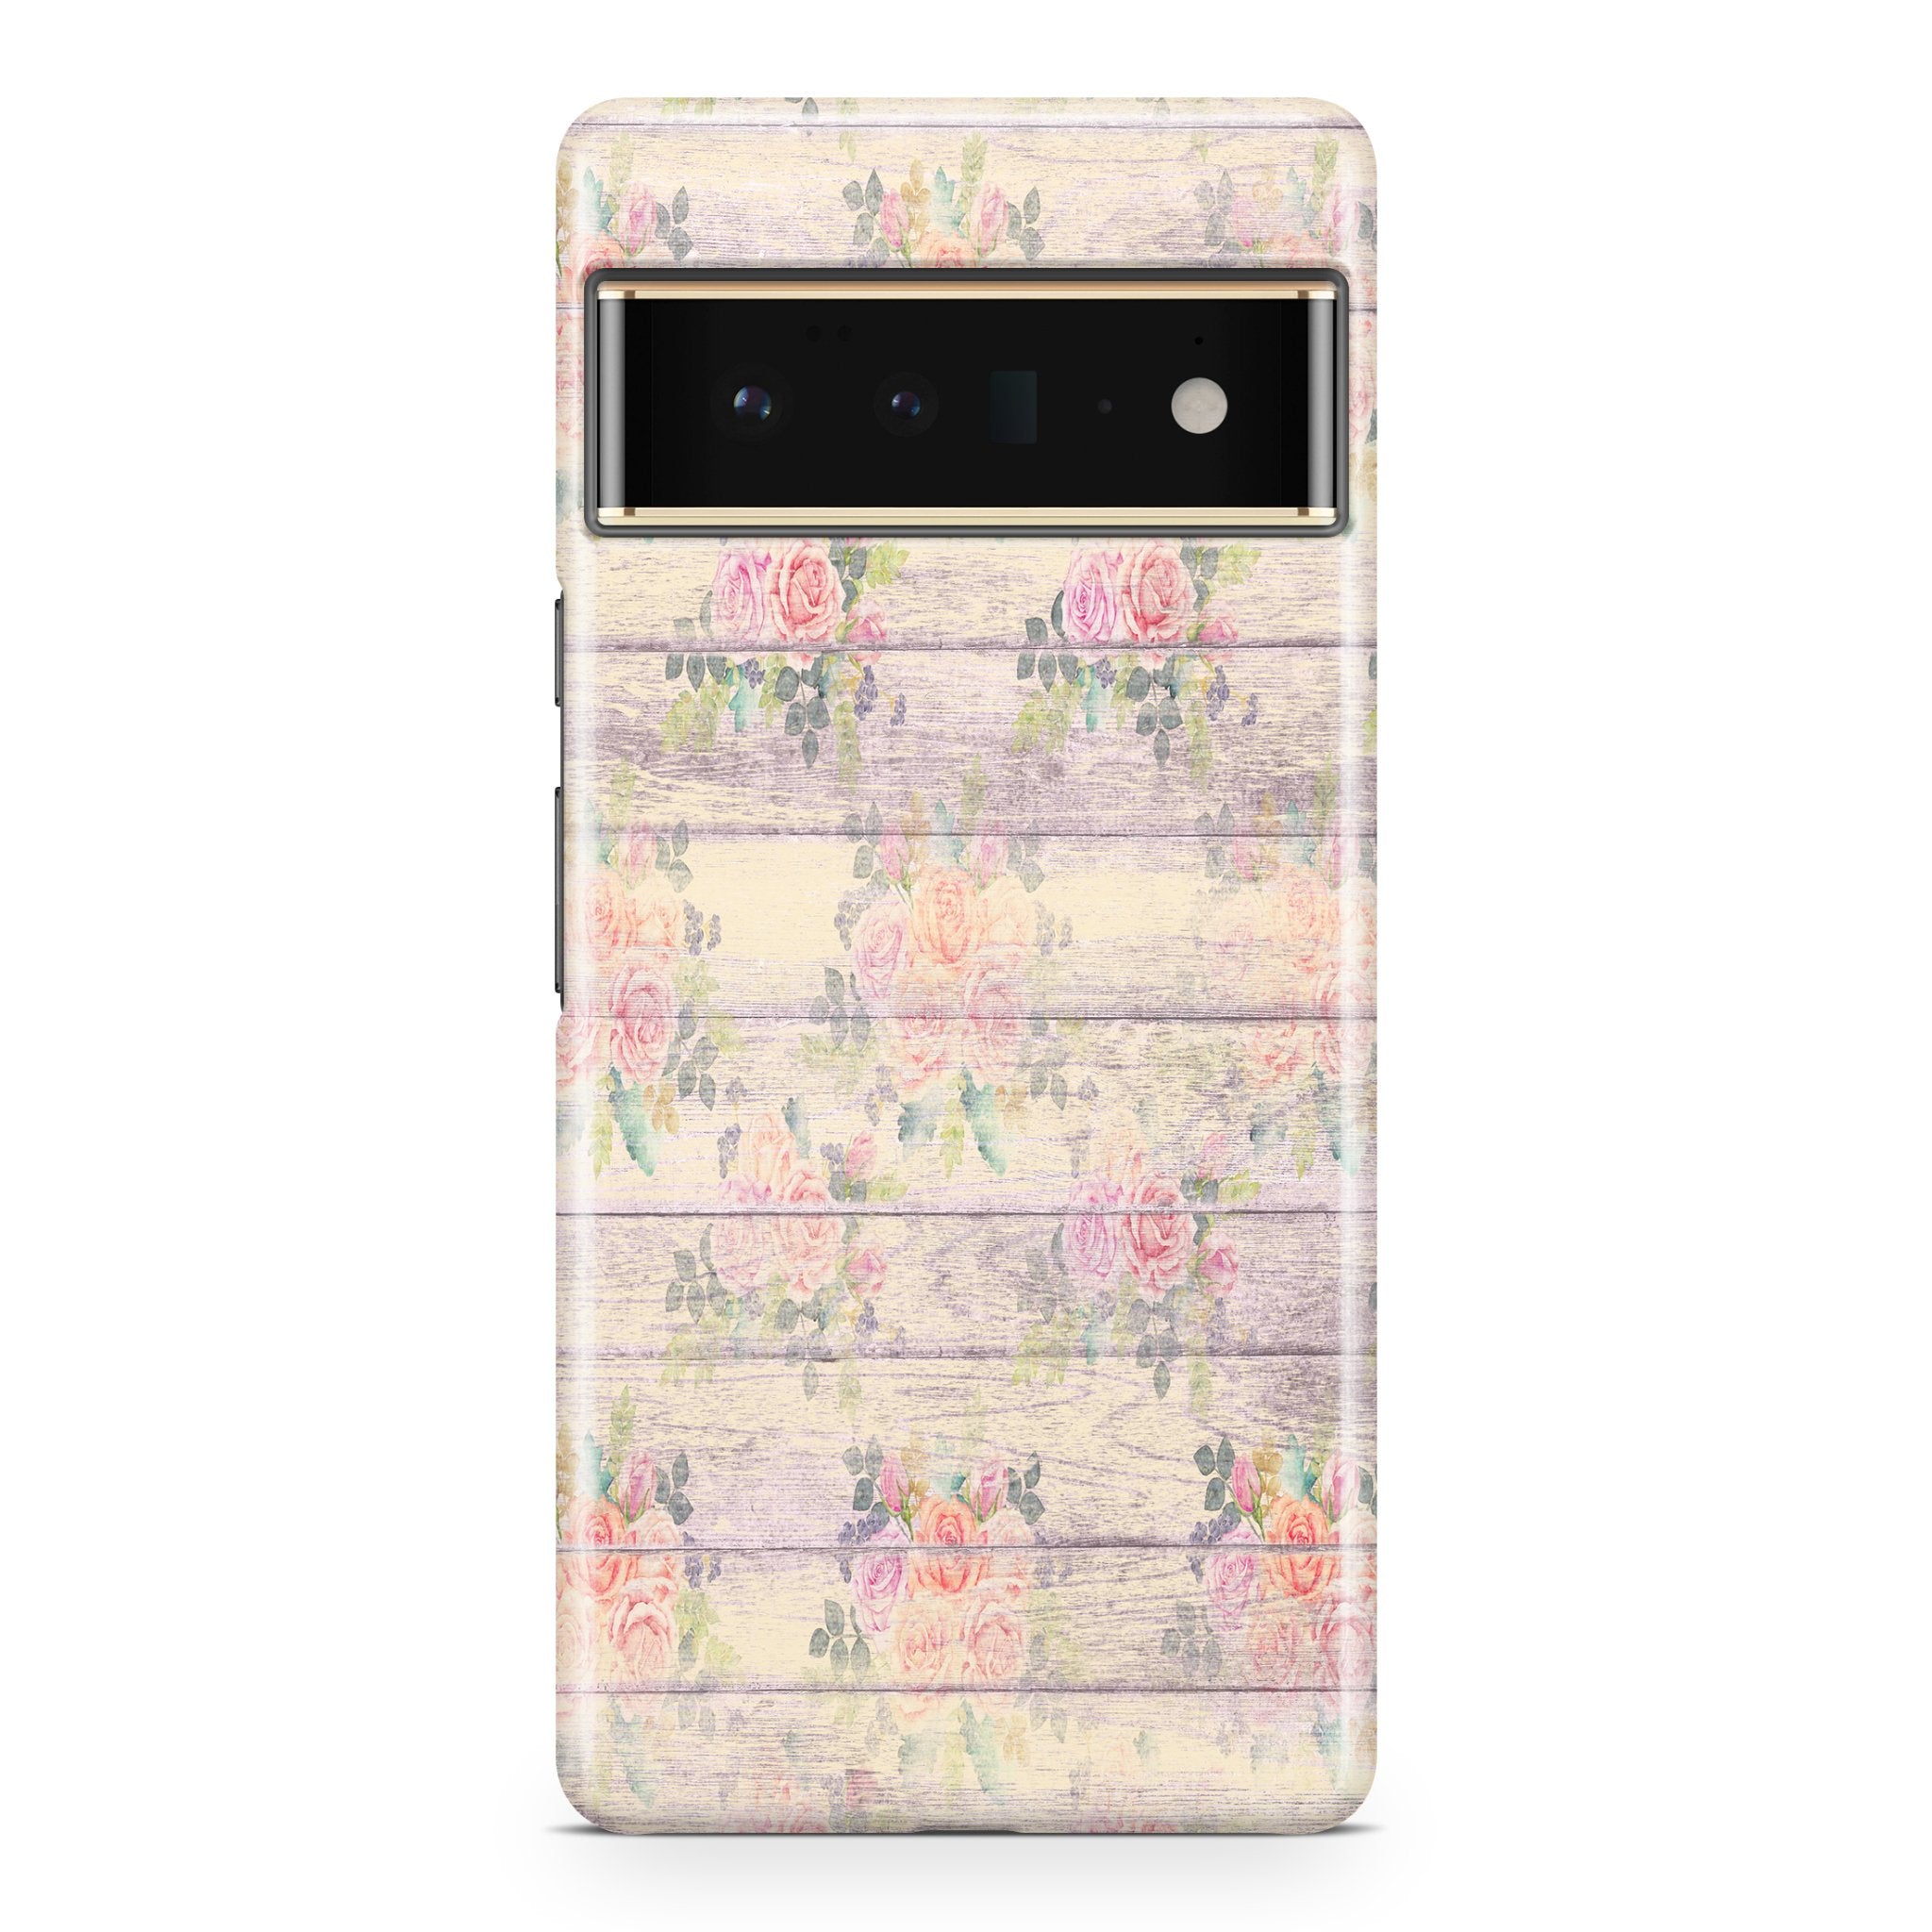 Shabby Chic Rosewood - Google phone case designs by CaseSwagger